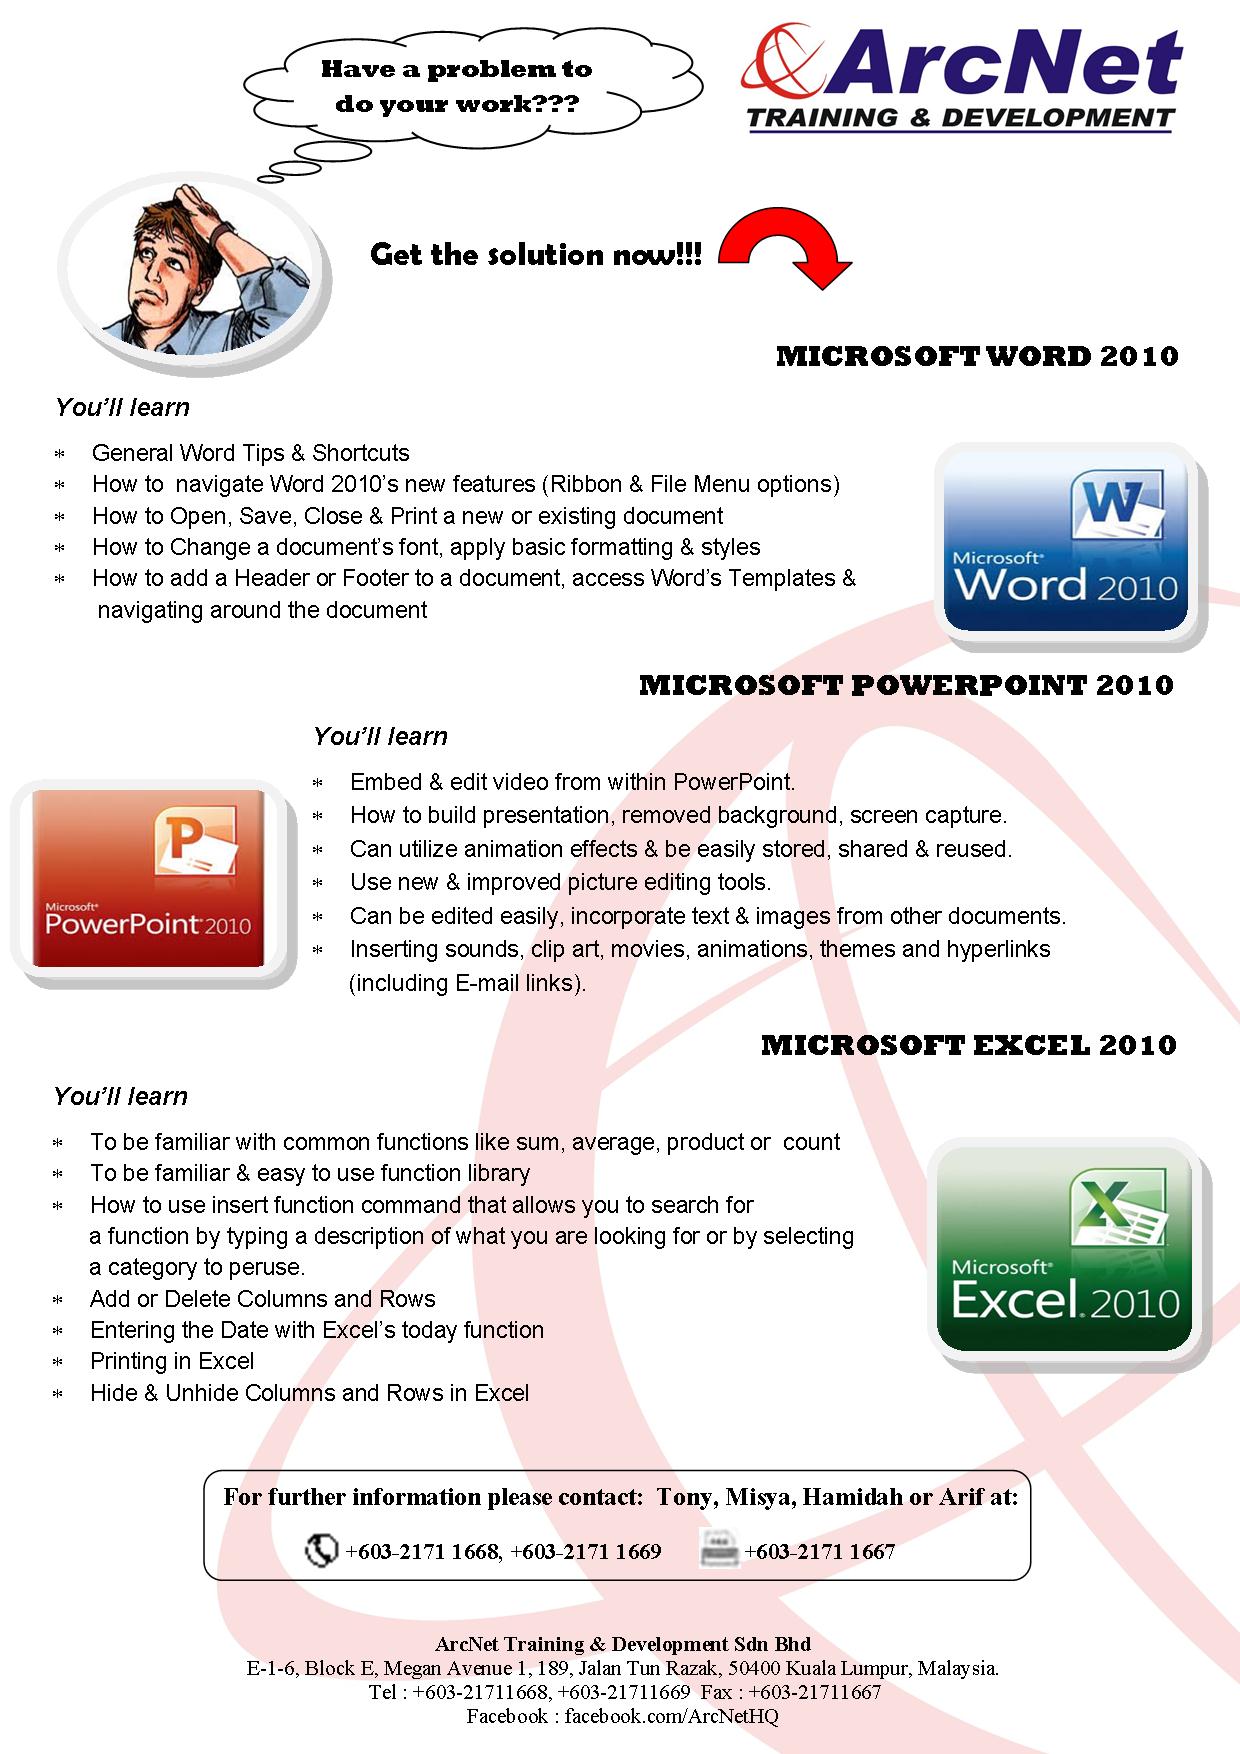 microsoft office word excel powerpoint free download